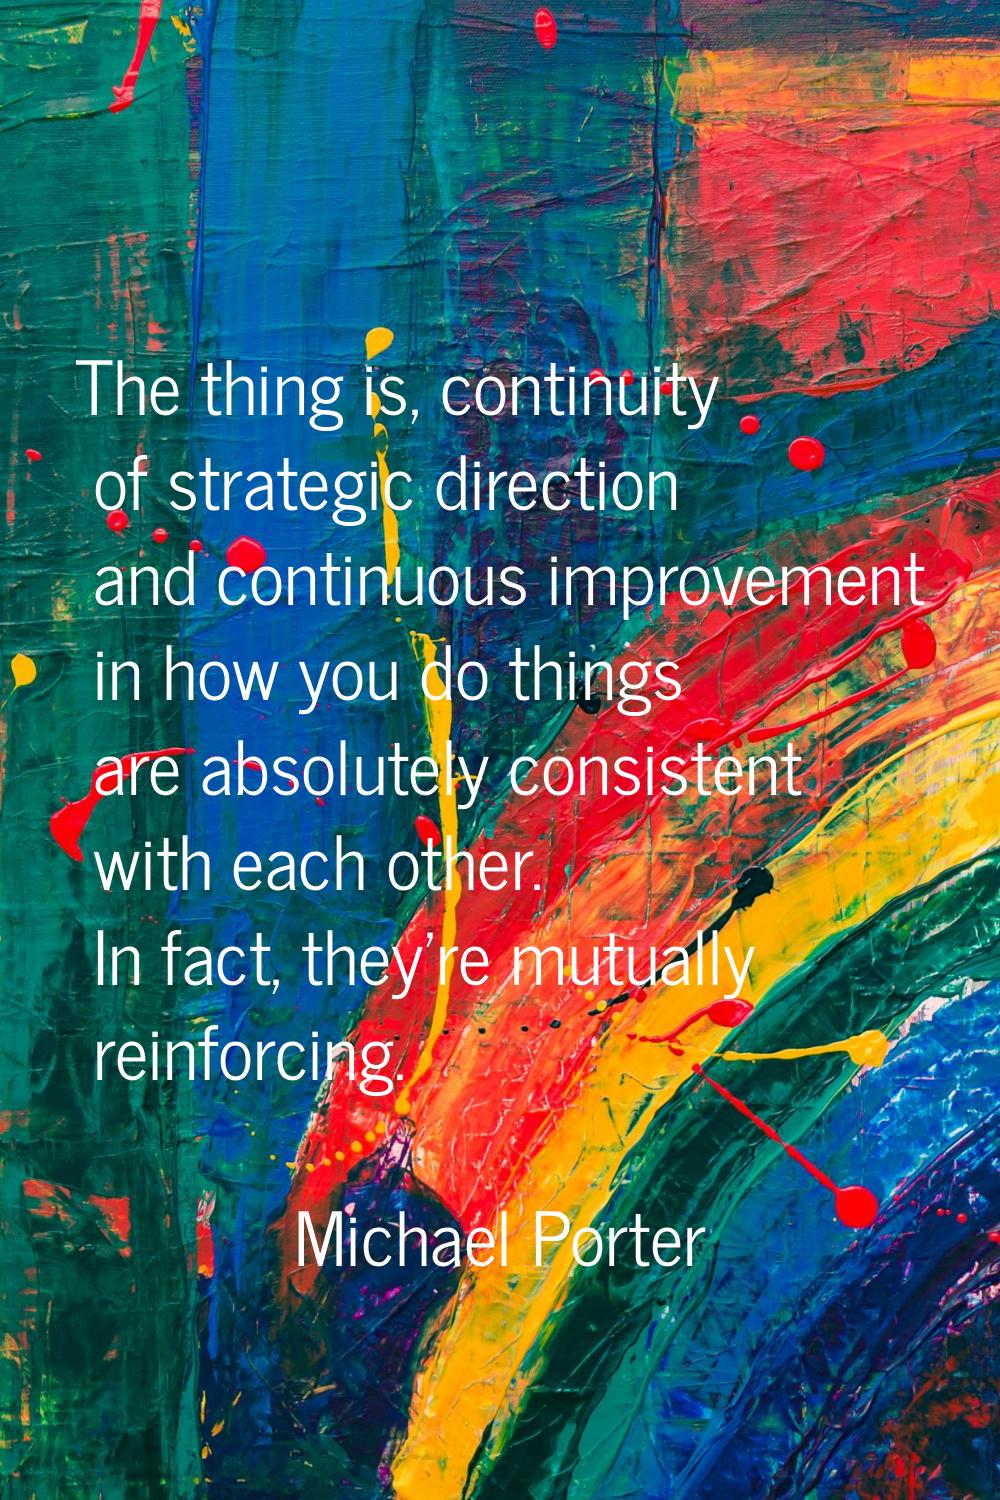 The thing is, continuity of strategic direction and continuous improvement in how you do things are